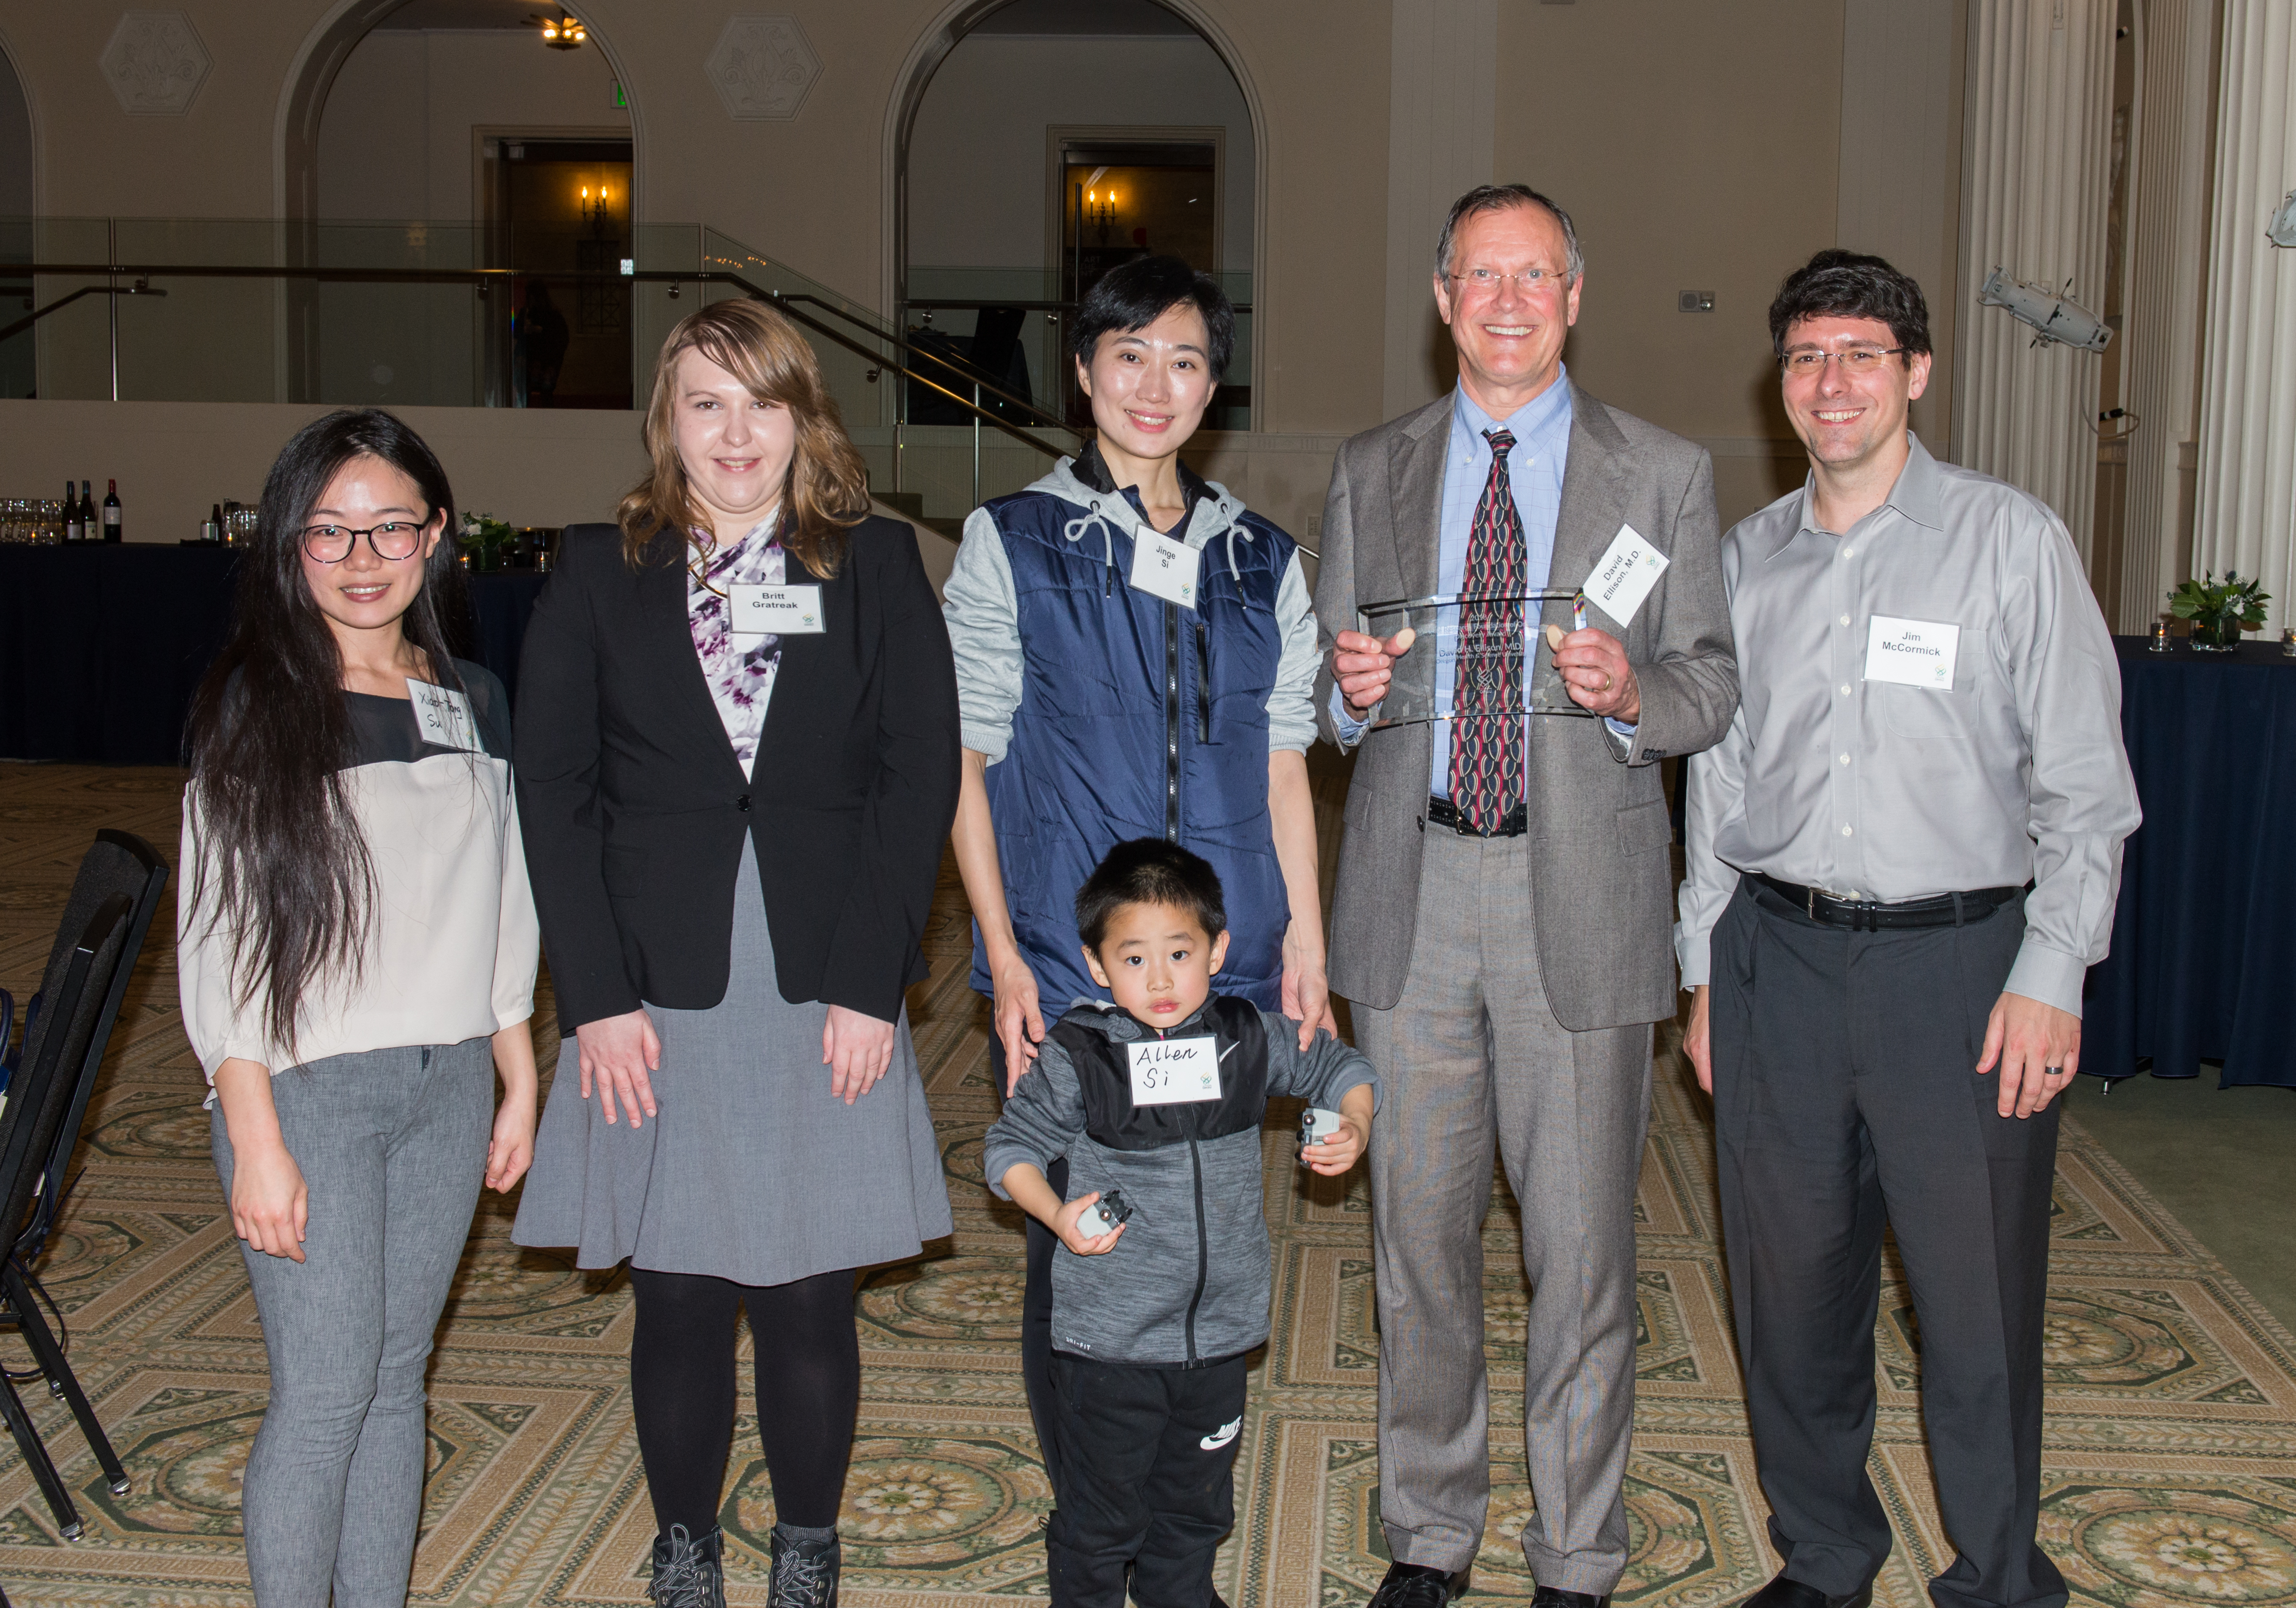 Left to right: Xiao-Tong Su, PhD, Britt Gratreak, Jinge Si, MD, PhD, David Ellison, MD, and Jim McCormick, PhD. Front: Little Allen Si. Medical Research Foundation Awards Dinner. November 2018